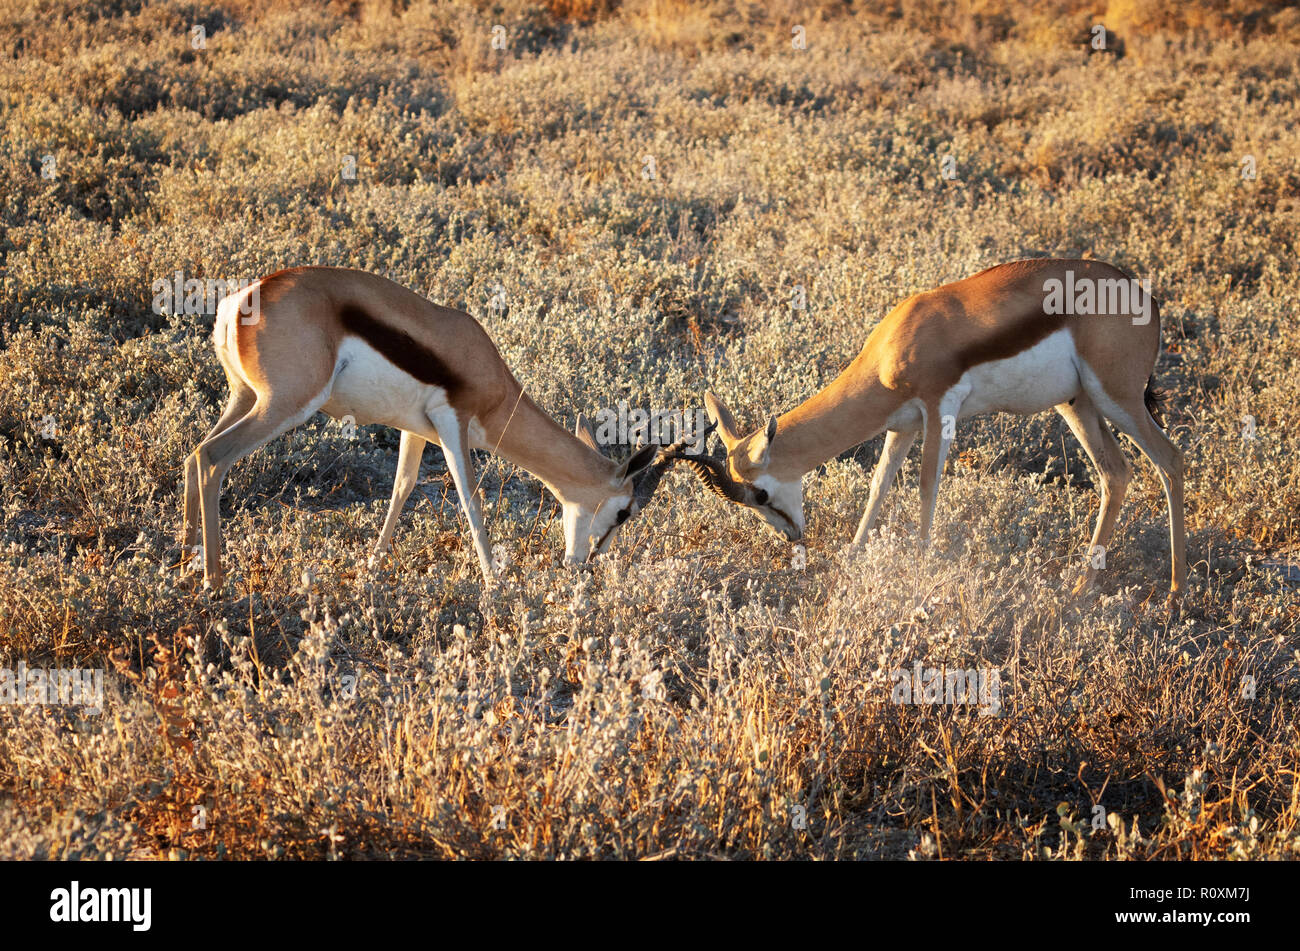 Springbok - two adult male springboks ( Antidorcas marsupialis ) locking horns and sparring fighting over territory, Namibia Africa. African animals Stock Photo